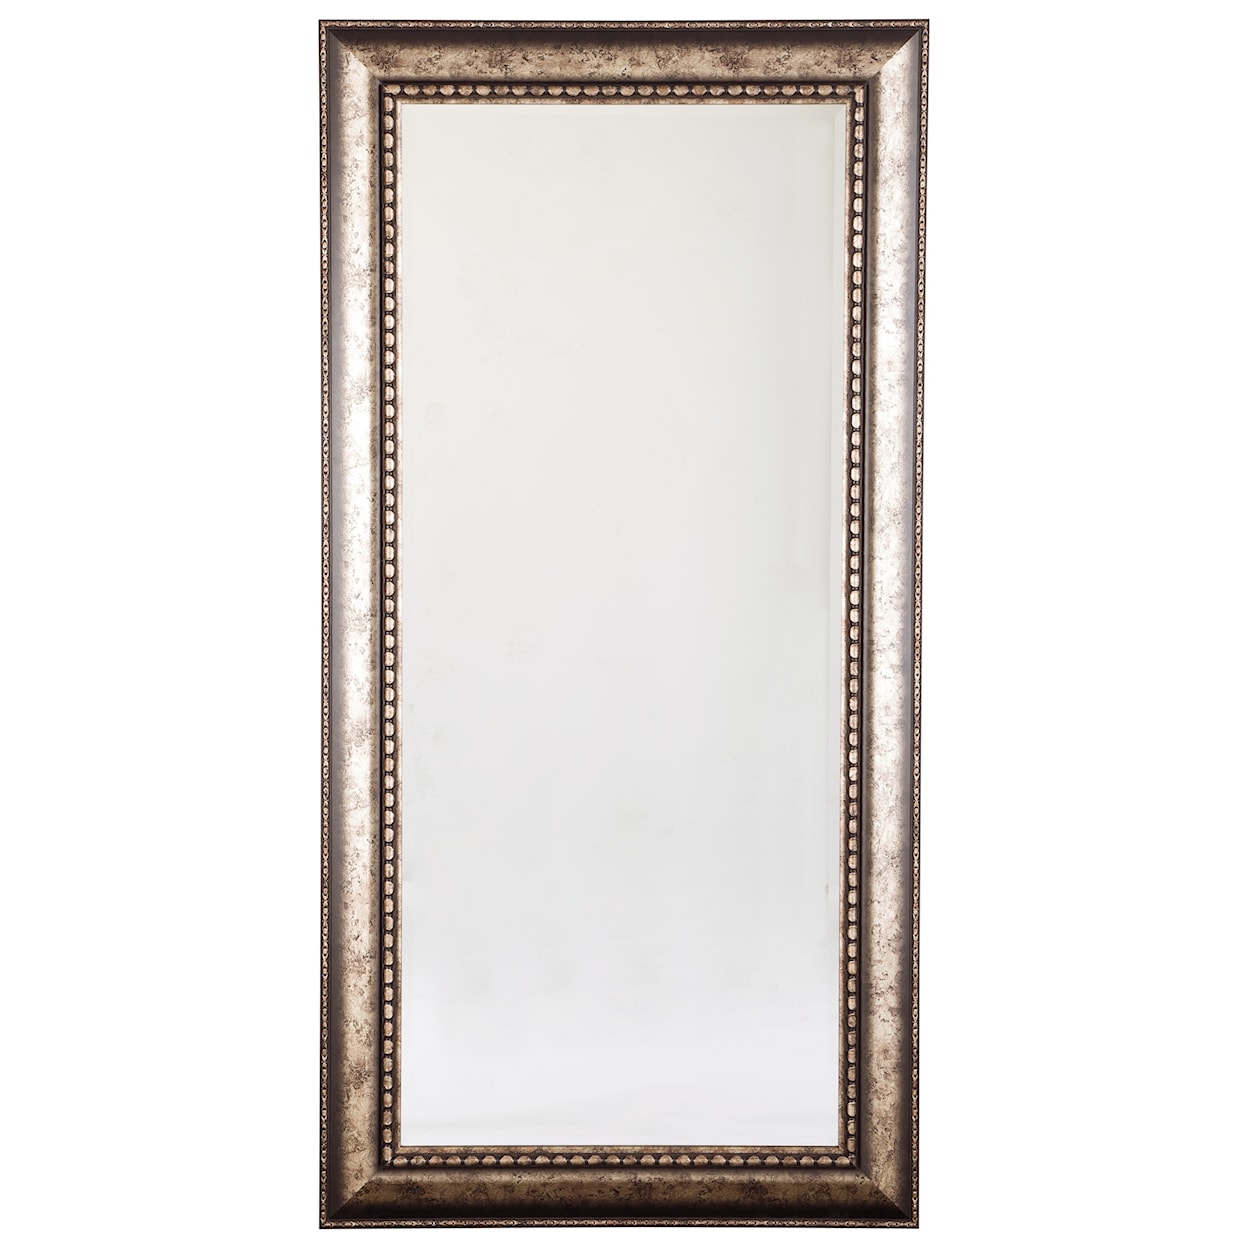 Signature Design by Ashley Accent Mirrors Dulal Antique Silver Finish Accent Mirror